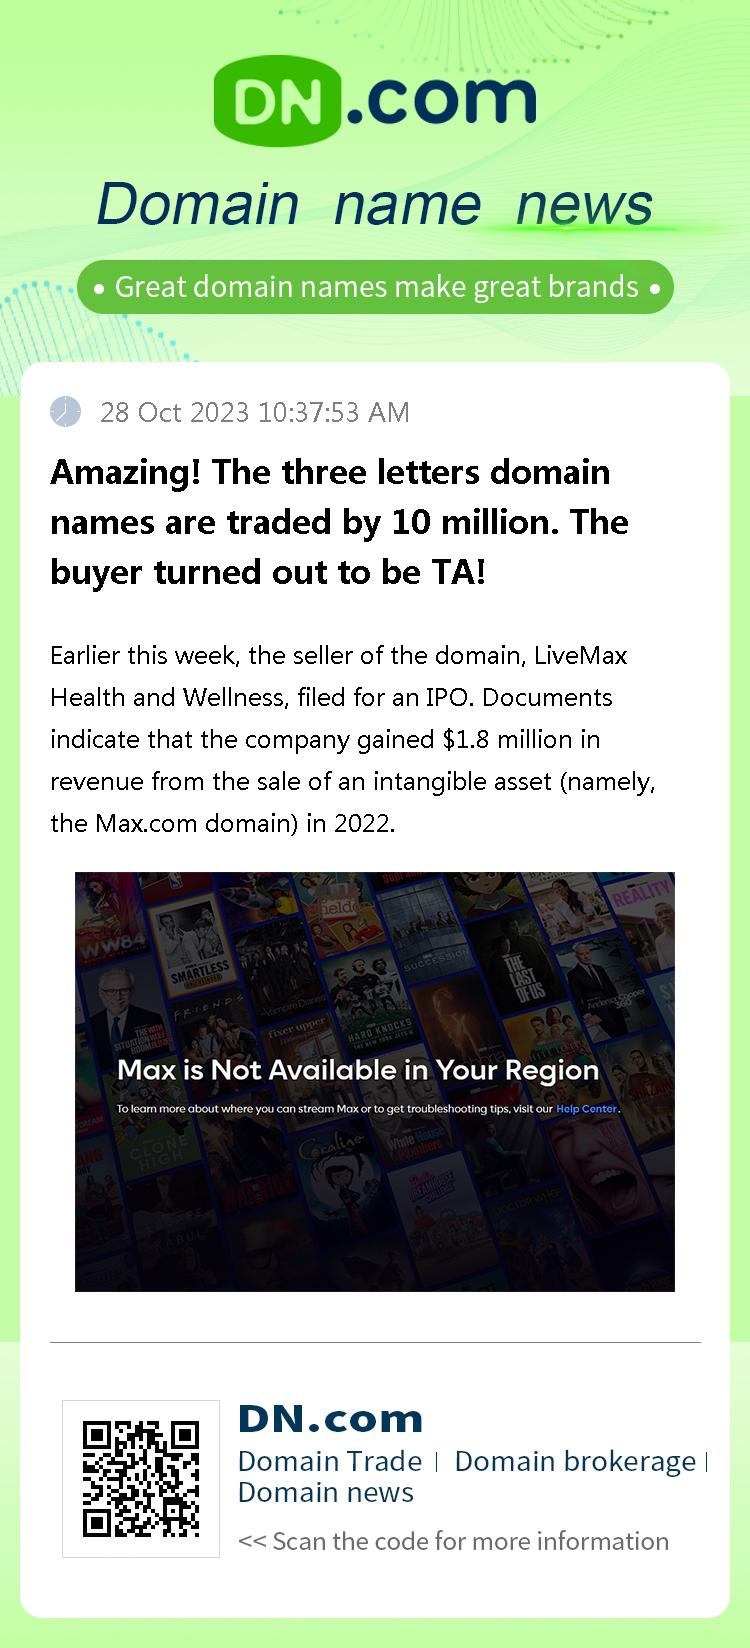 Amazing! The three letters domain names are traded by 10 million. The buyer turned out to be TA!